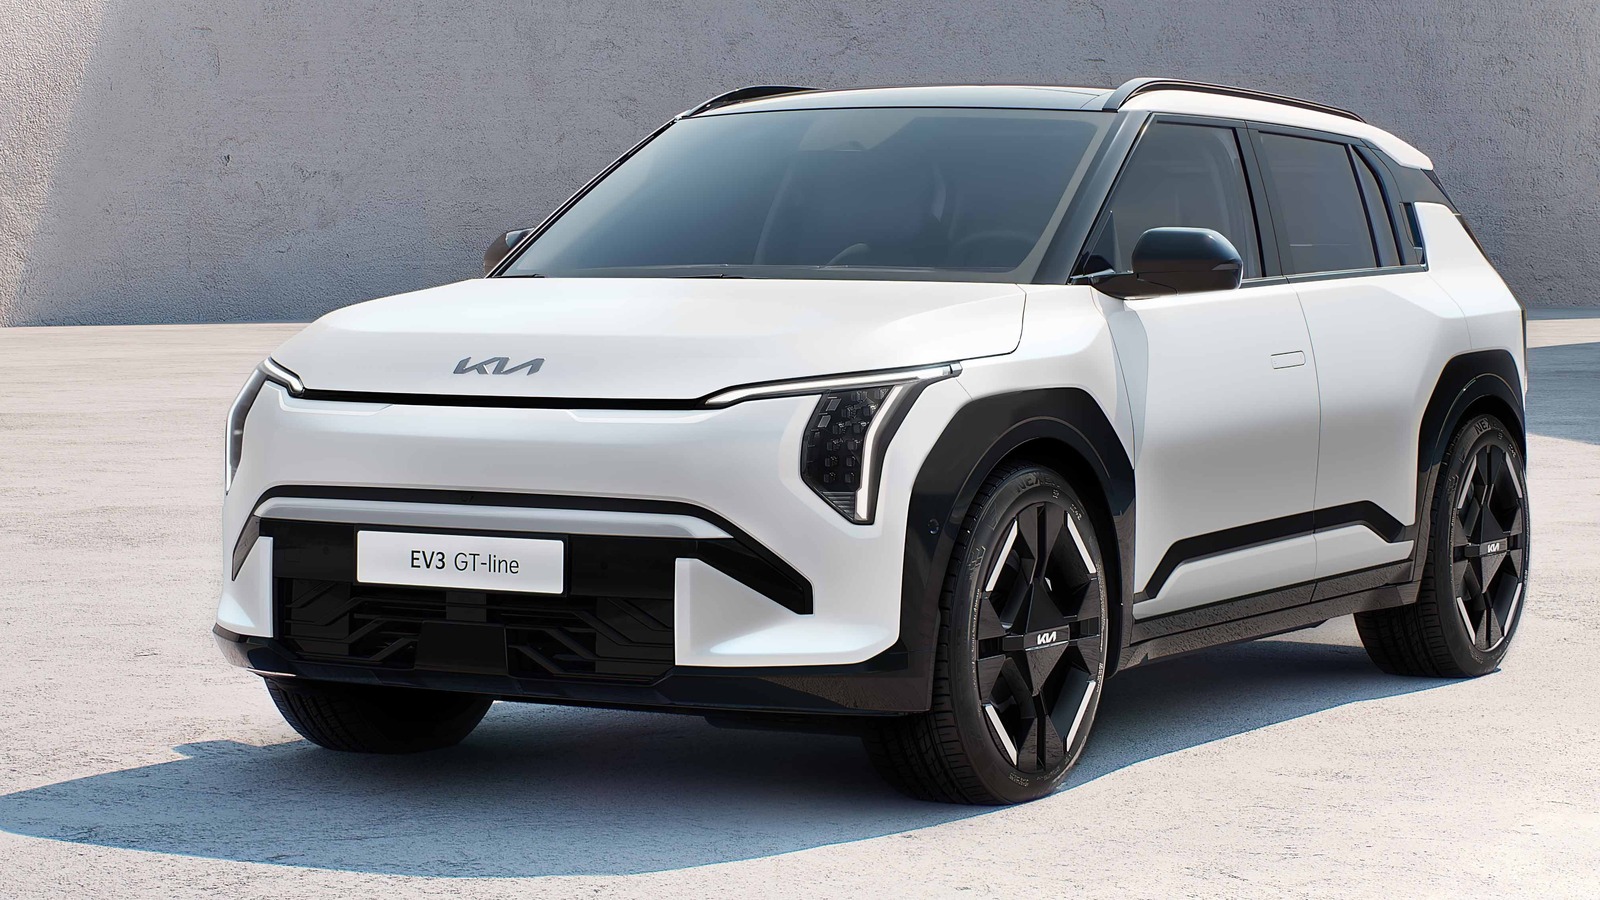 Kia EV3 Revealed With Big Style, Big Range, And Two Big Questions